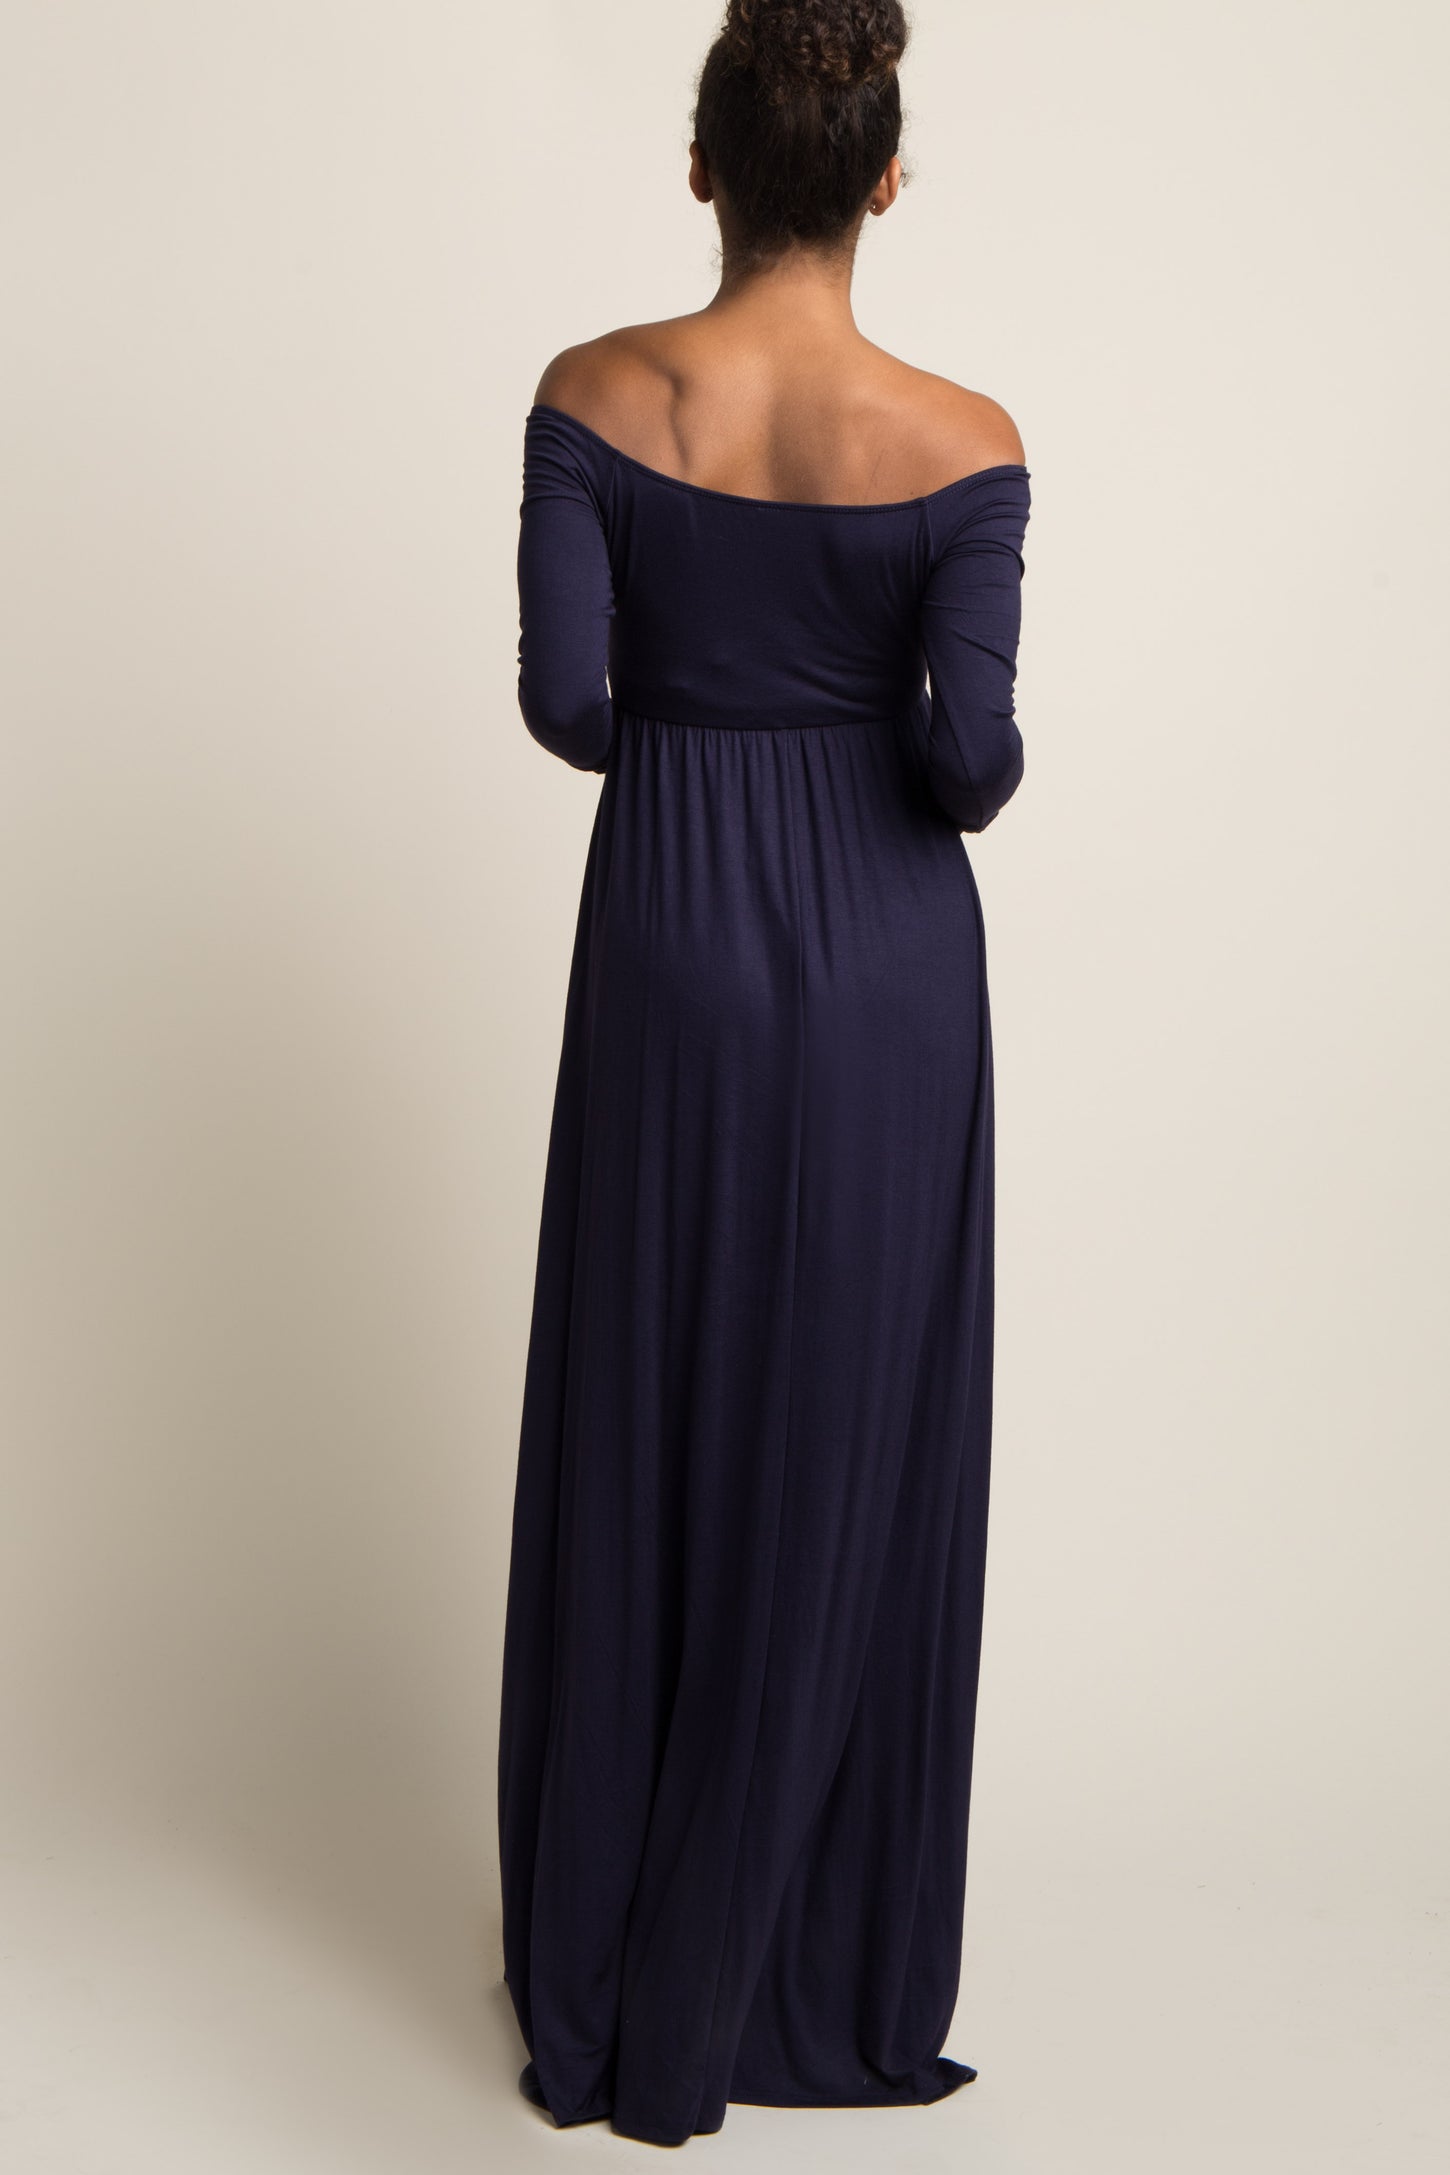 PinkBlush Petite Navy Blue Solid Off Shoulder Maternity Maxi Dress